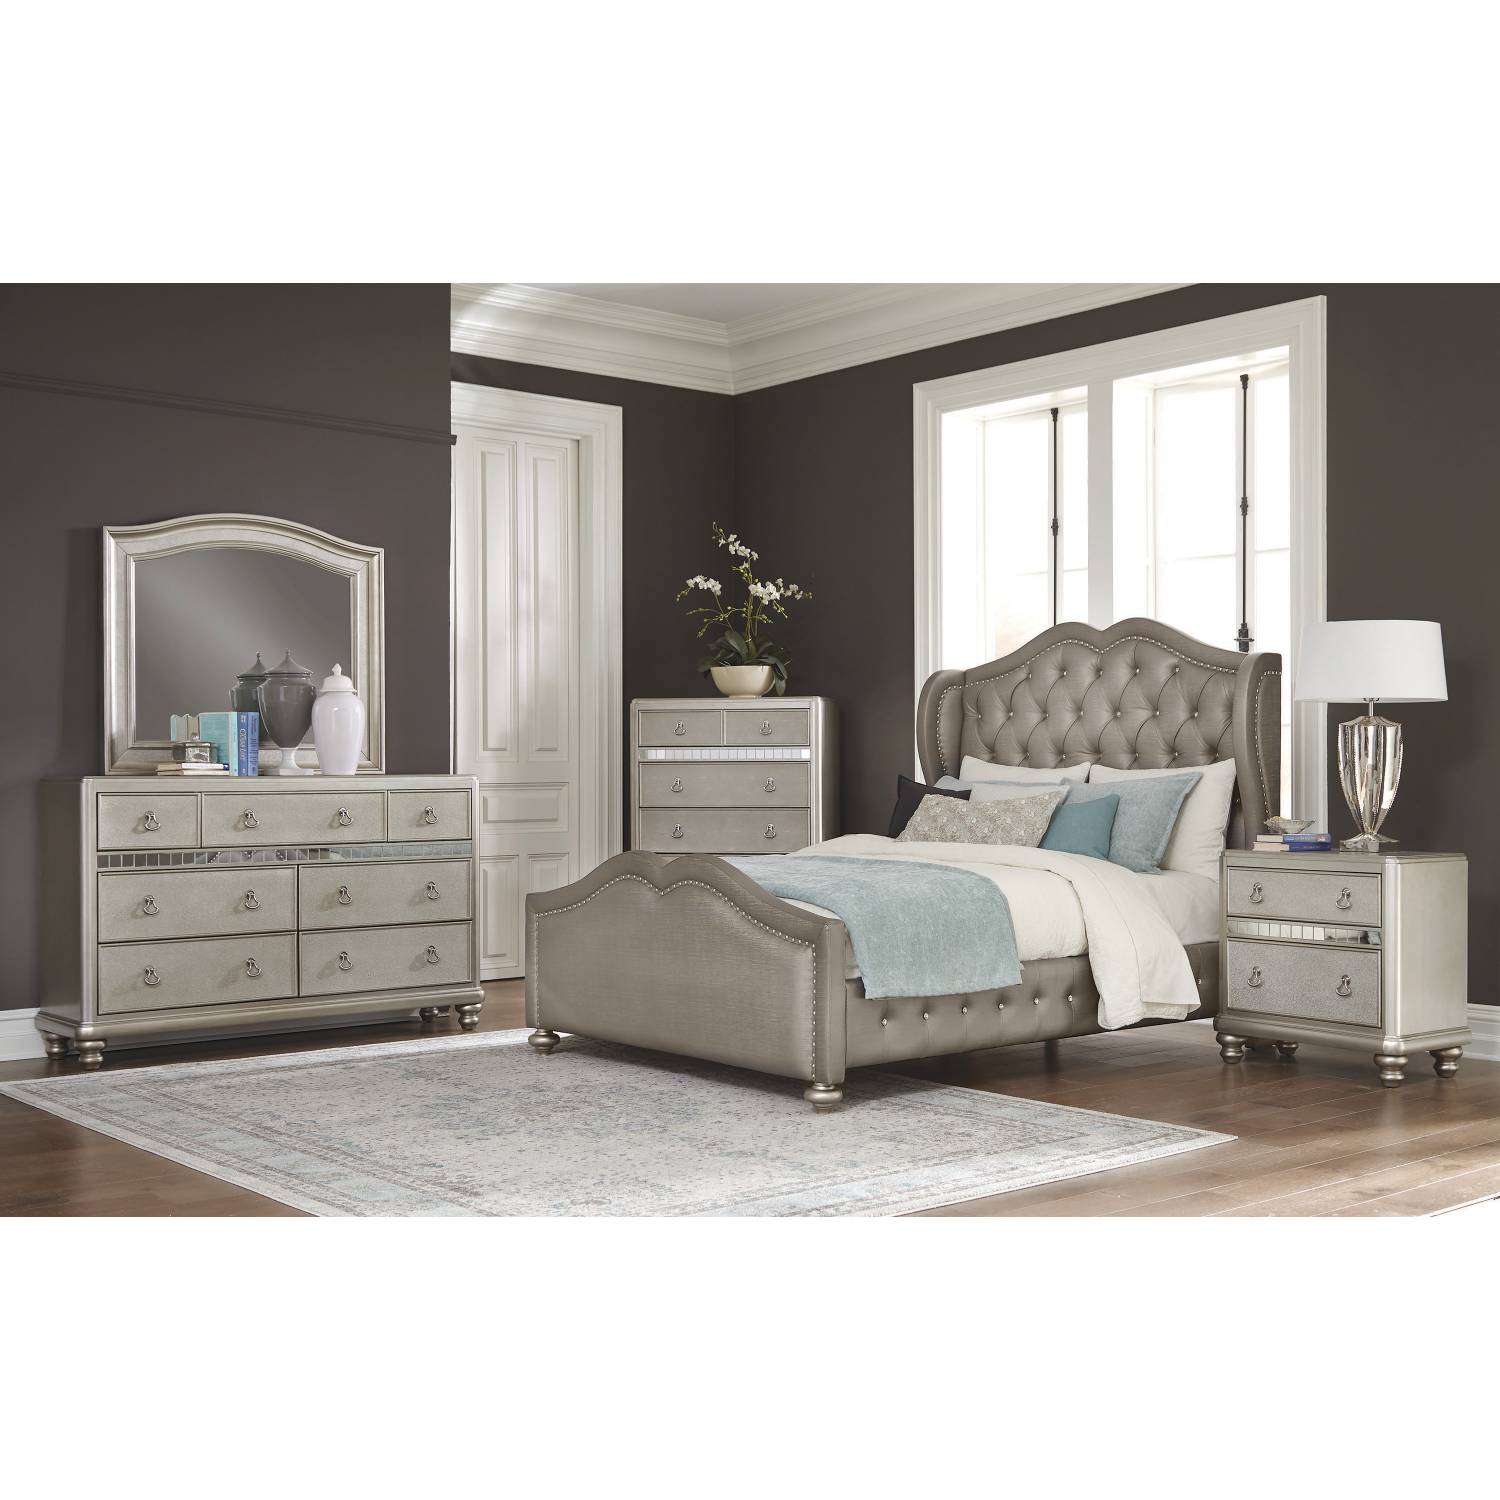 300824q S4 4pc Sets Queen Bed Mirror, Dresser And Chester Set